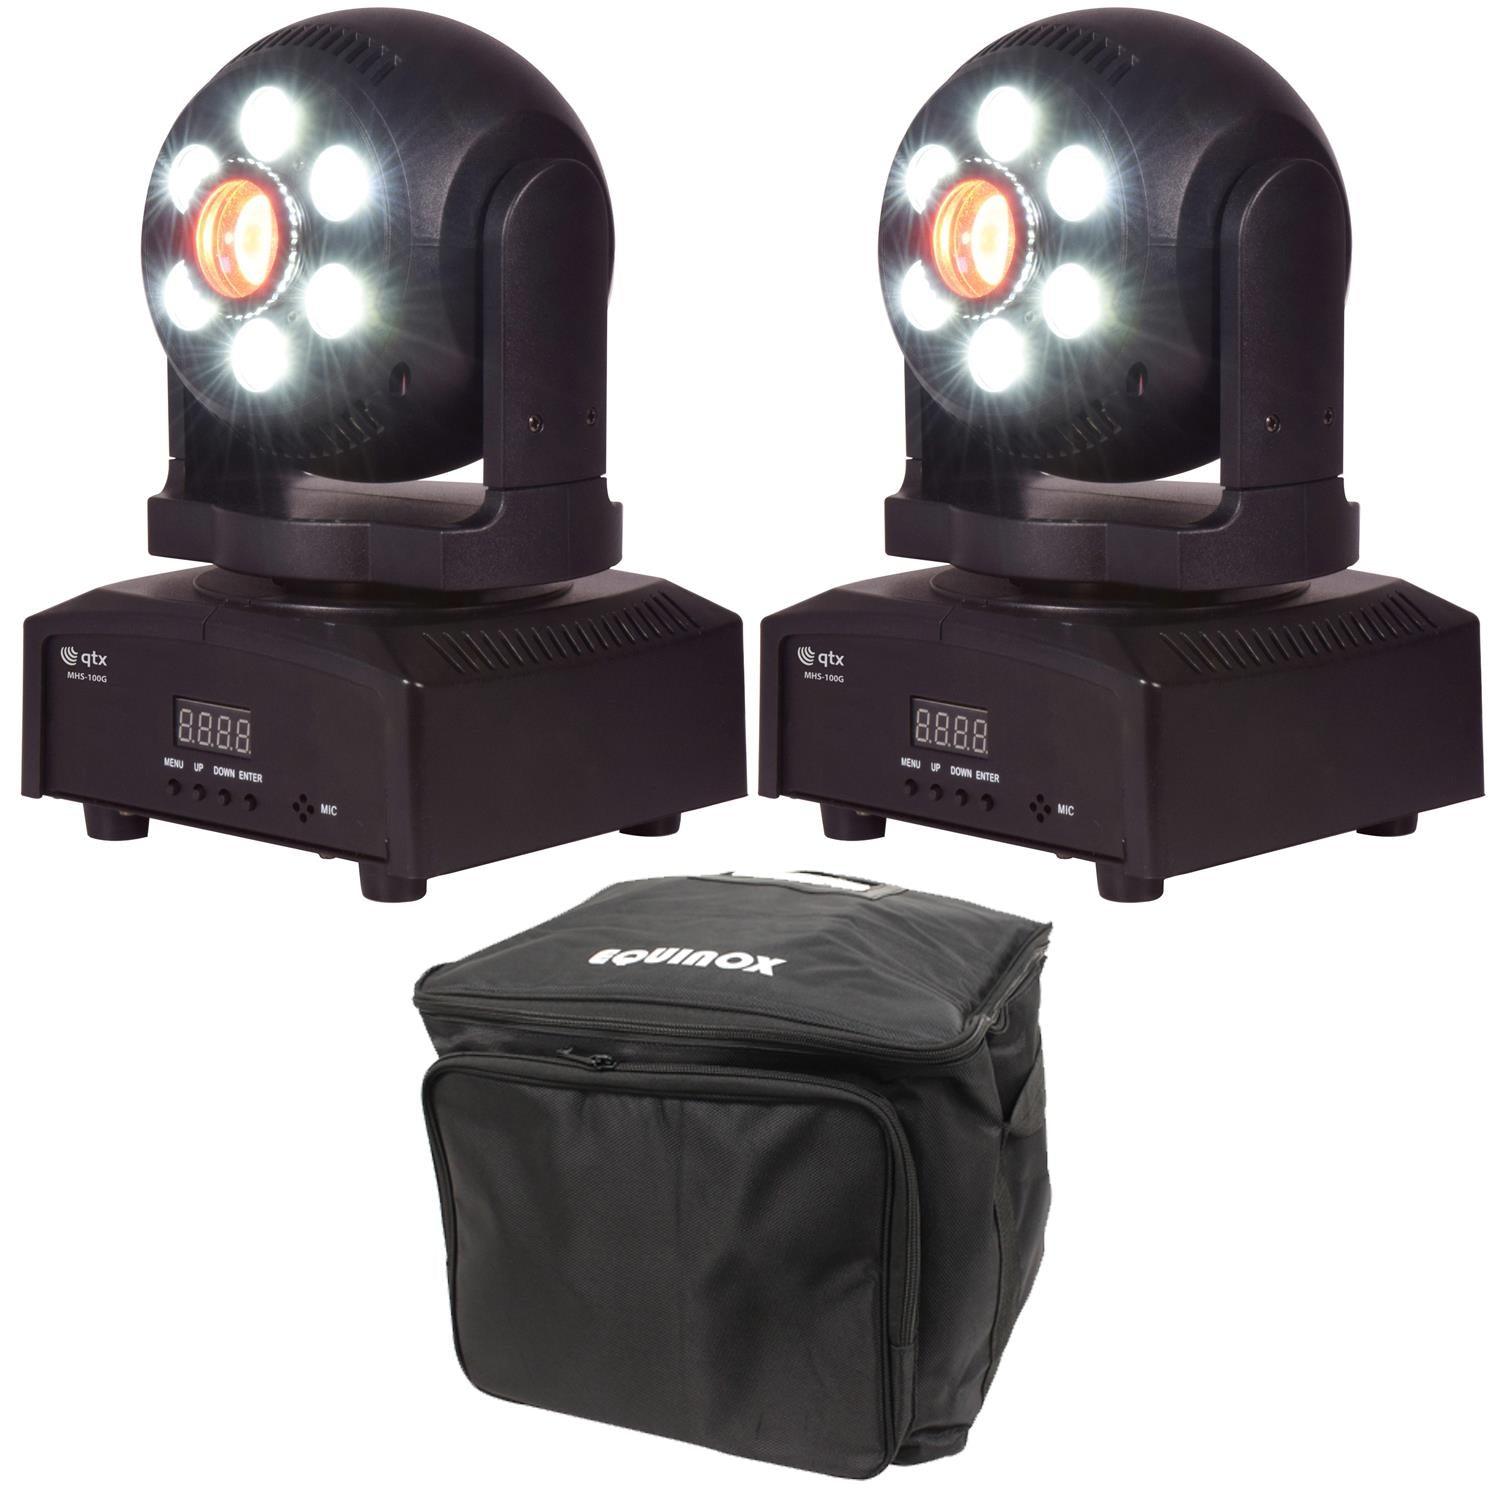 2 x QTX MHS-100G Spot Wash LED Moving Head with Carry Bag - DY Pro Audio